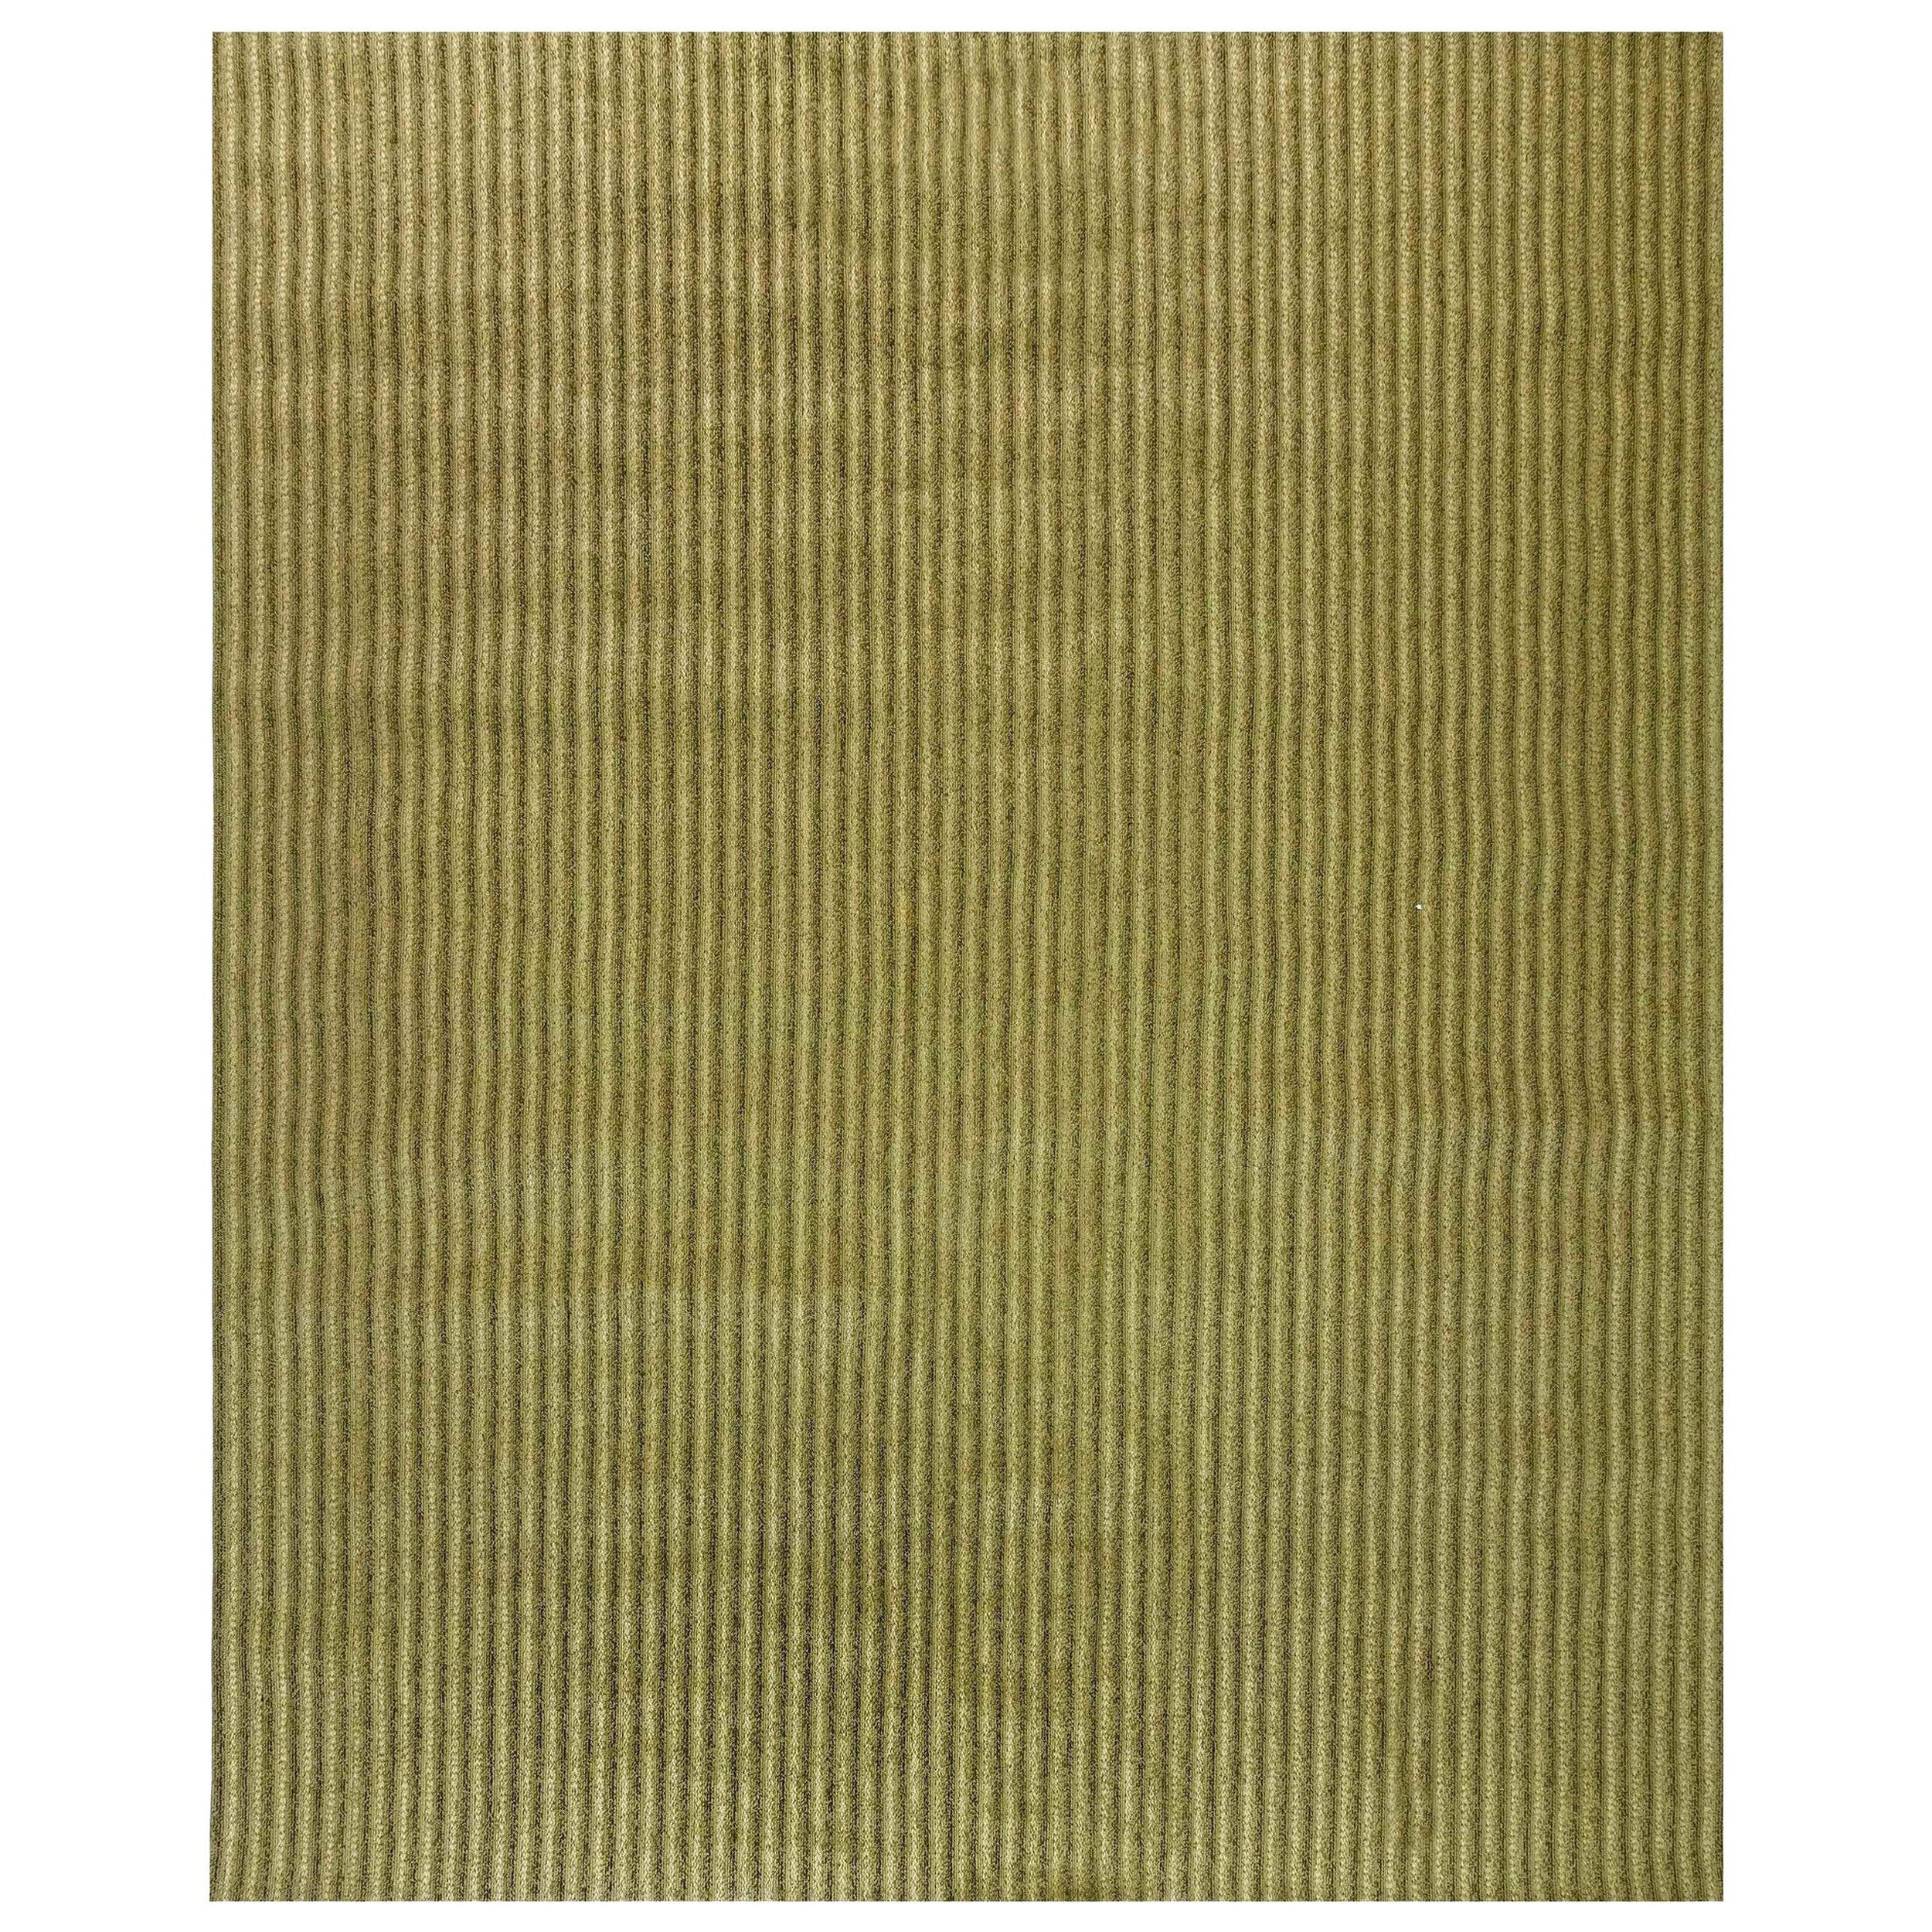 Contemporary Striped Twisted Belts Leather Rug by Doris Leslie Blau